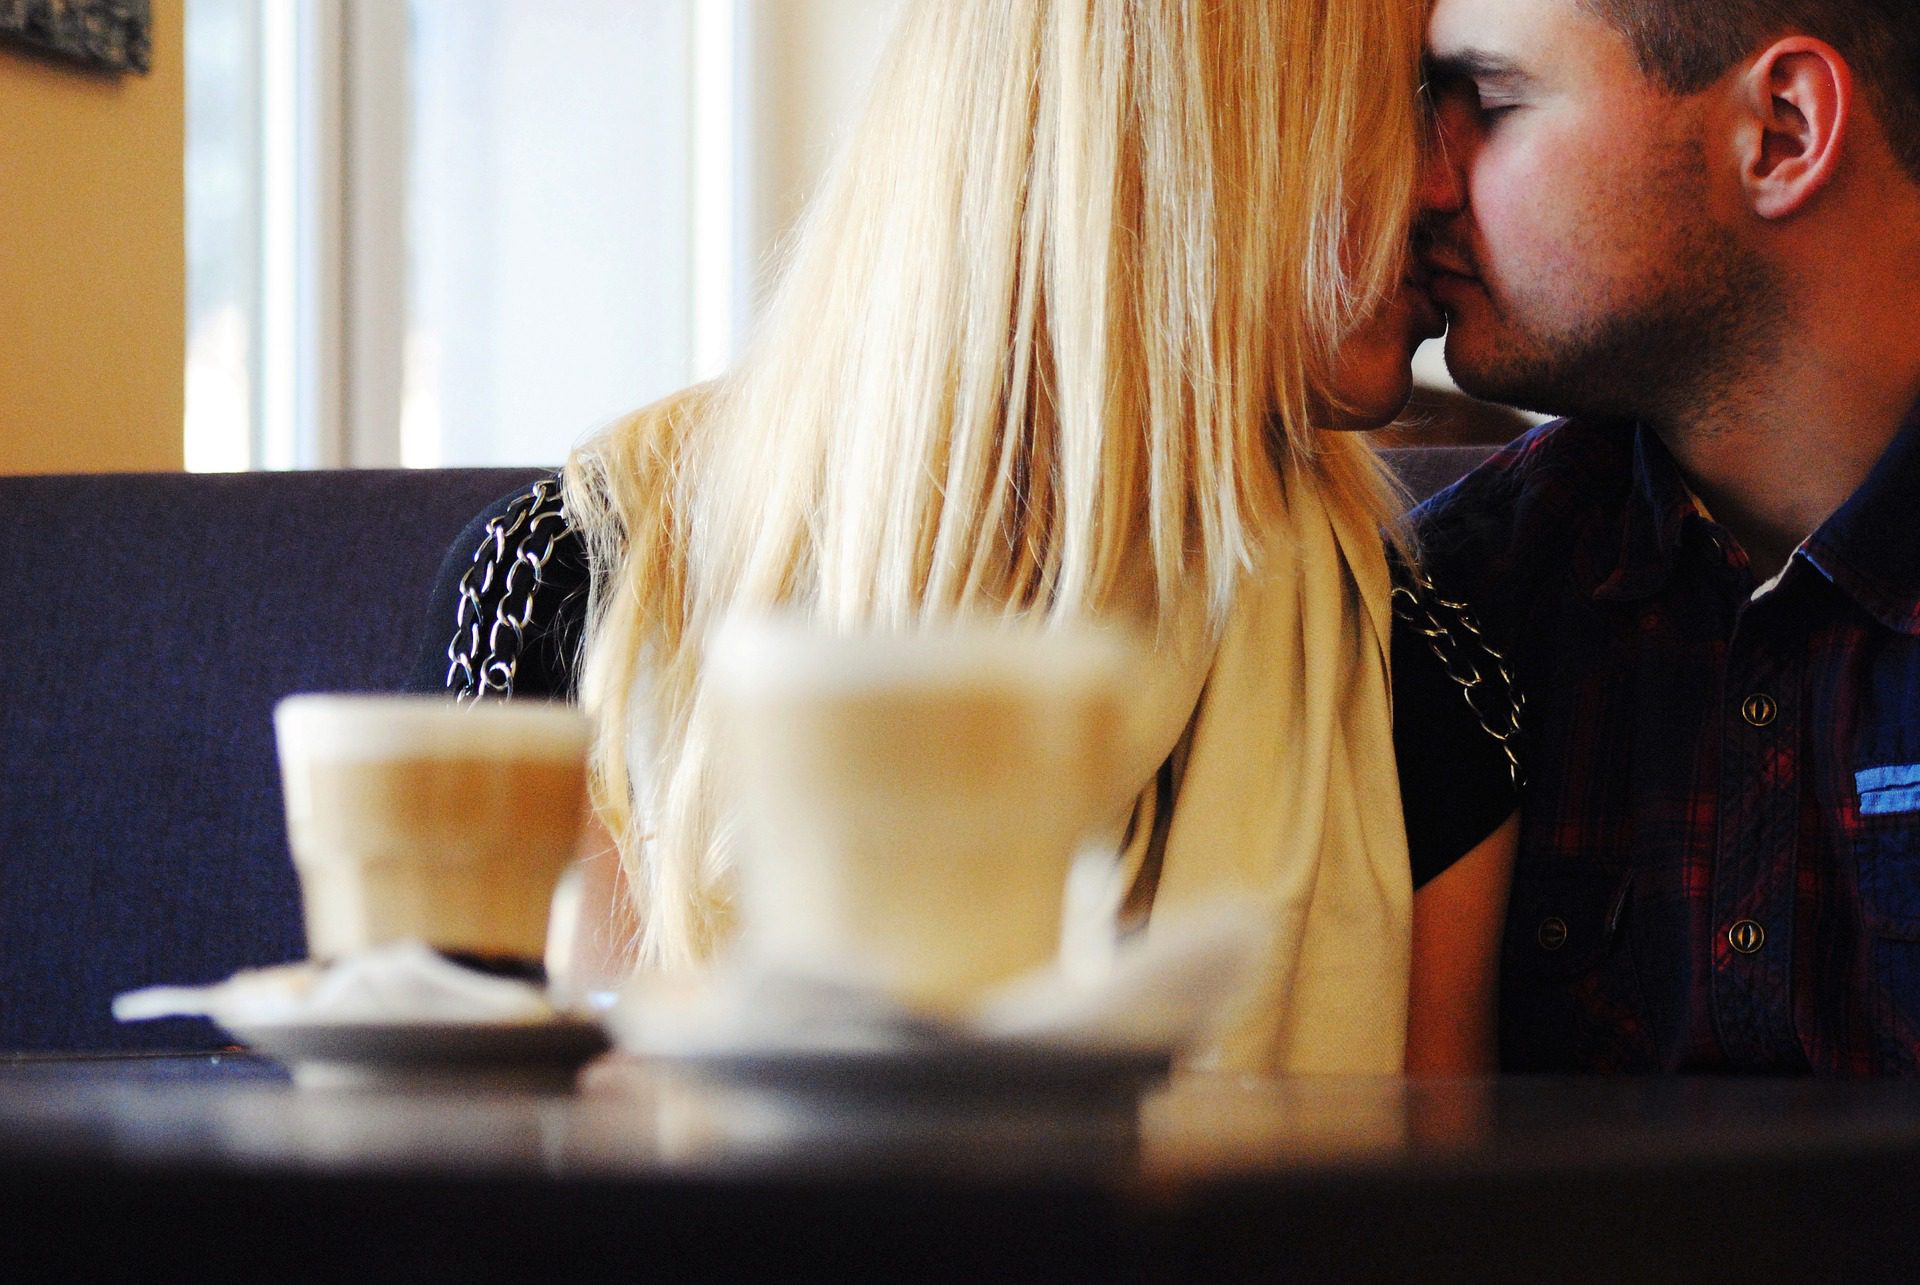 Man and woman at a cafe